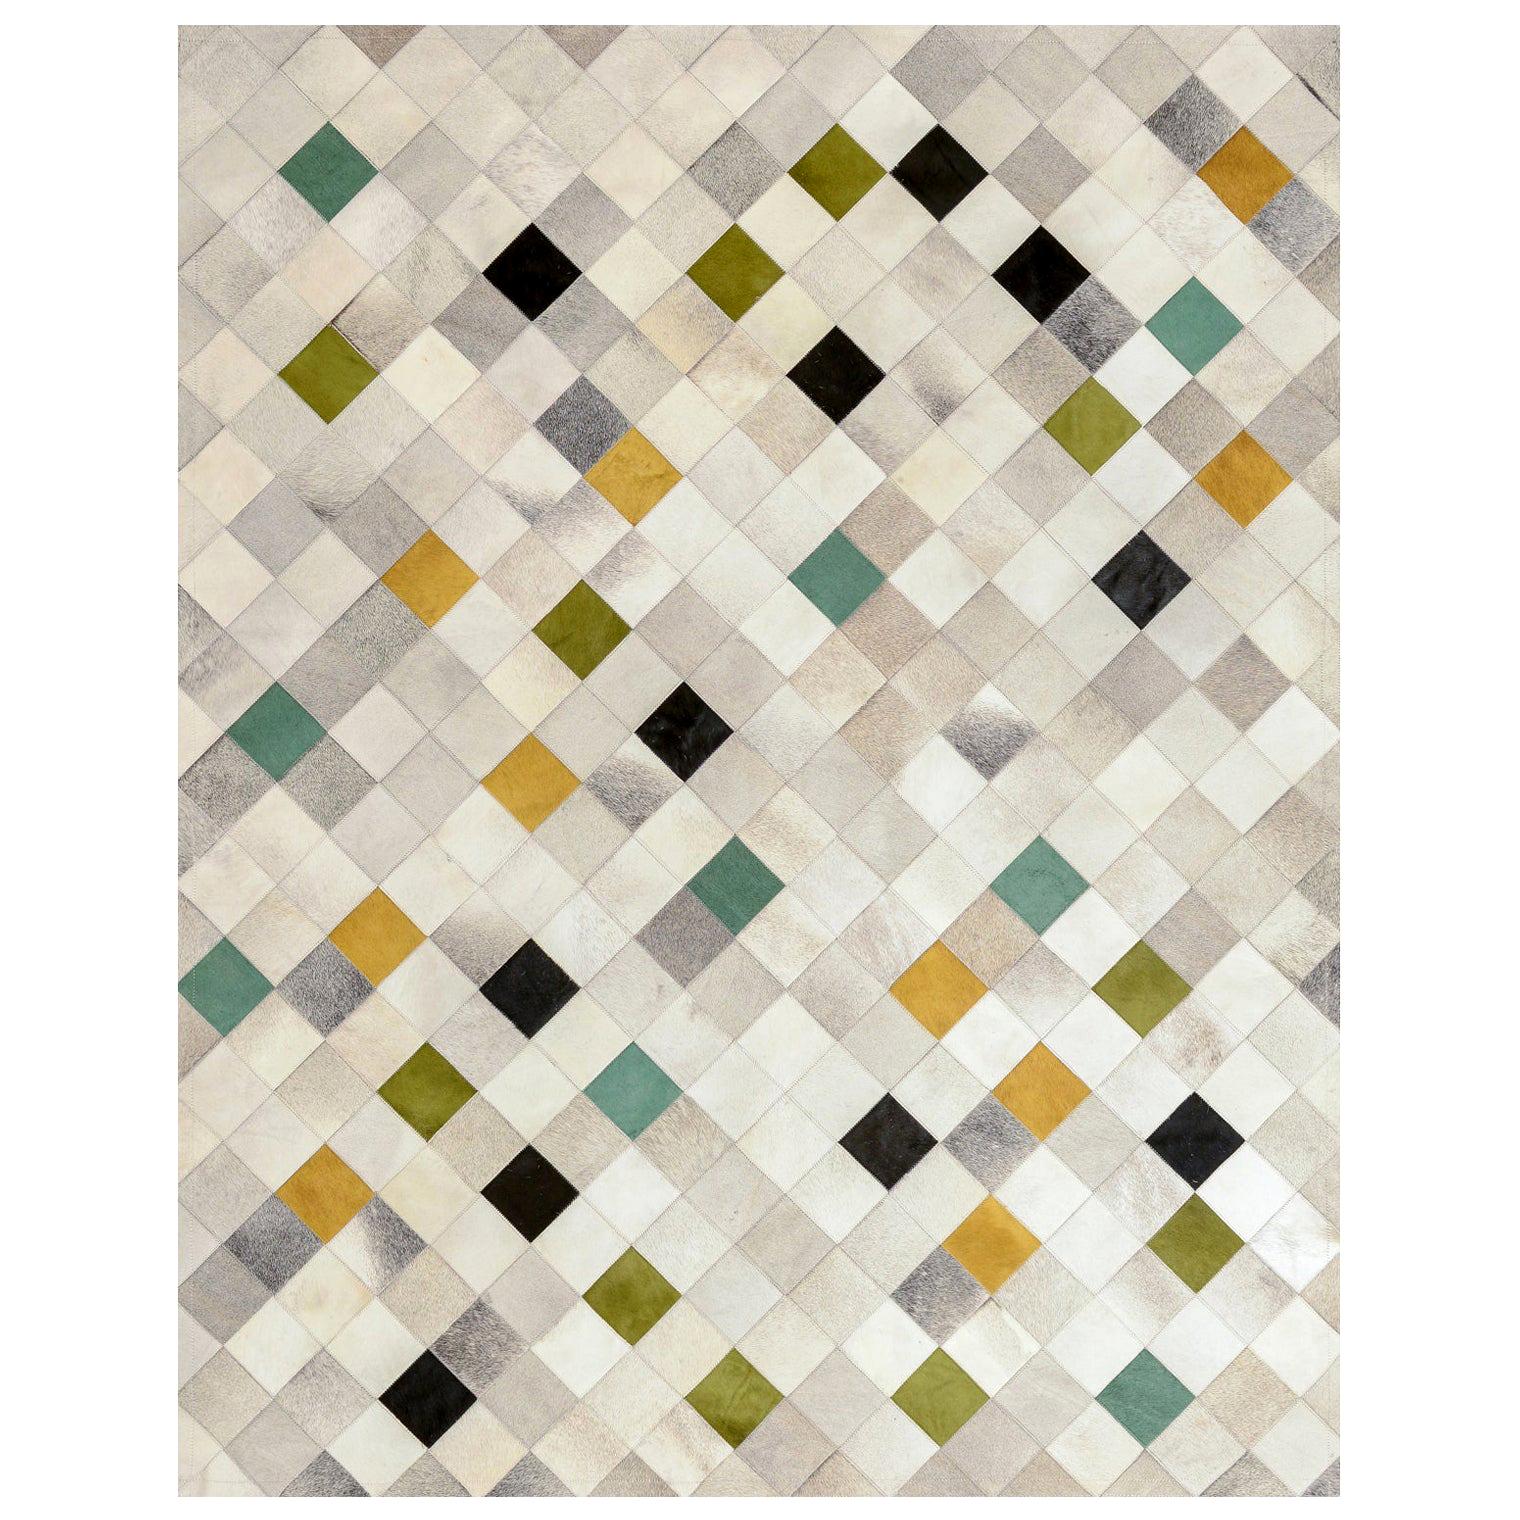 Green, Gray, Mustard Falling Squares Customizable Cowhide Area Floor Rug Large